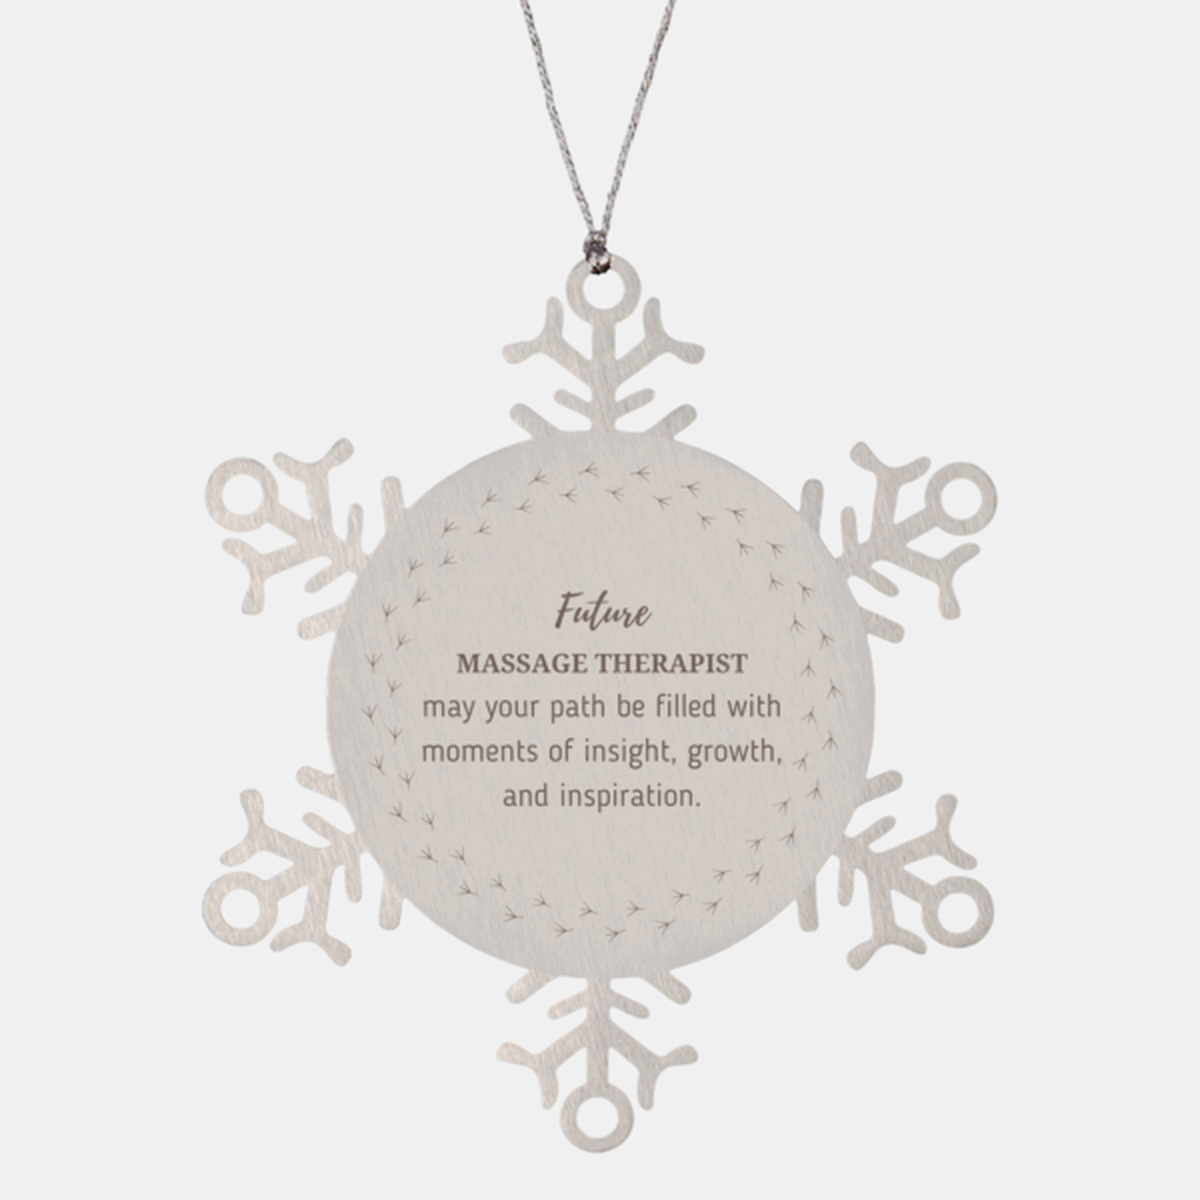 Future Massage Therapist Gifts, May your path be filled with moments of insight, Graduation Gifts for New Massage Therapist, Christmas Unique Snowflake Ornament For Men, Women, Friends